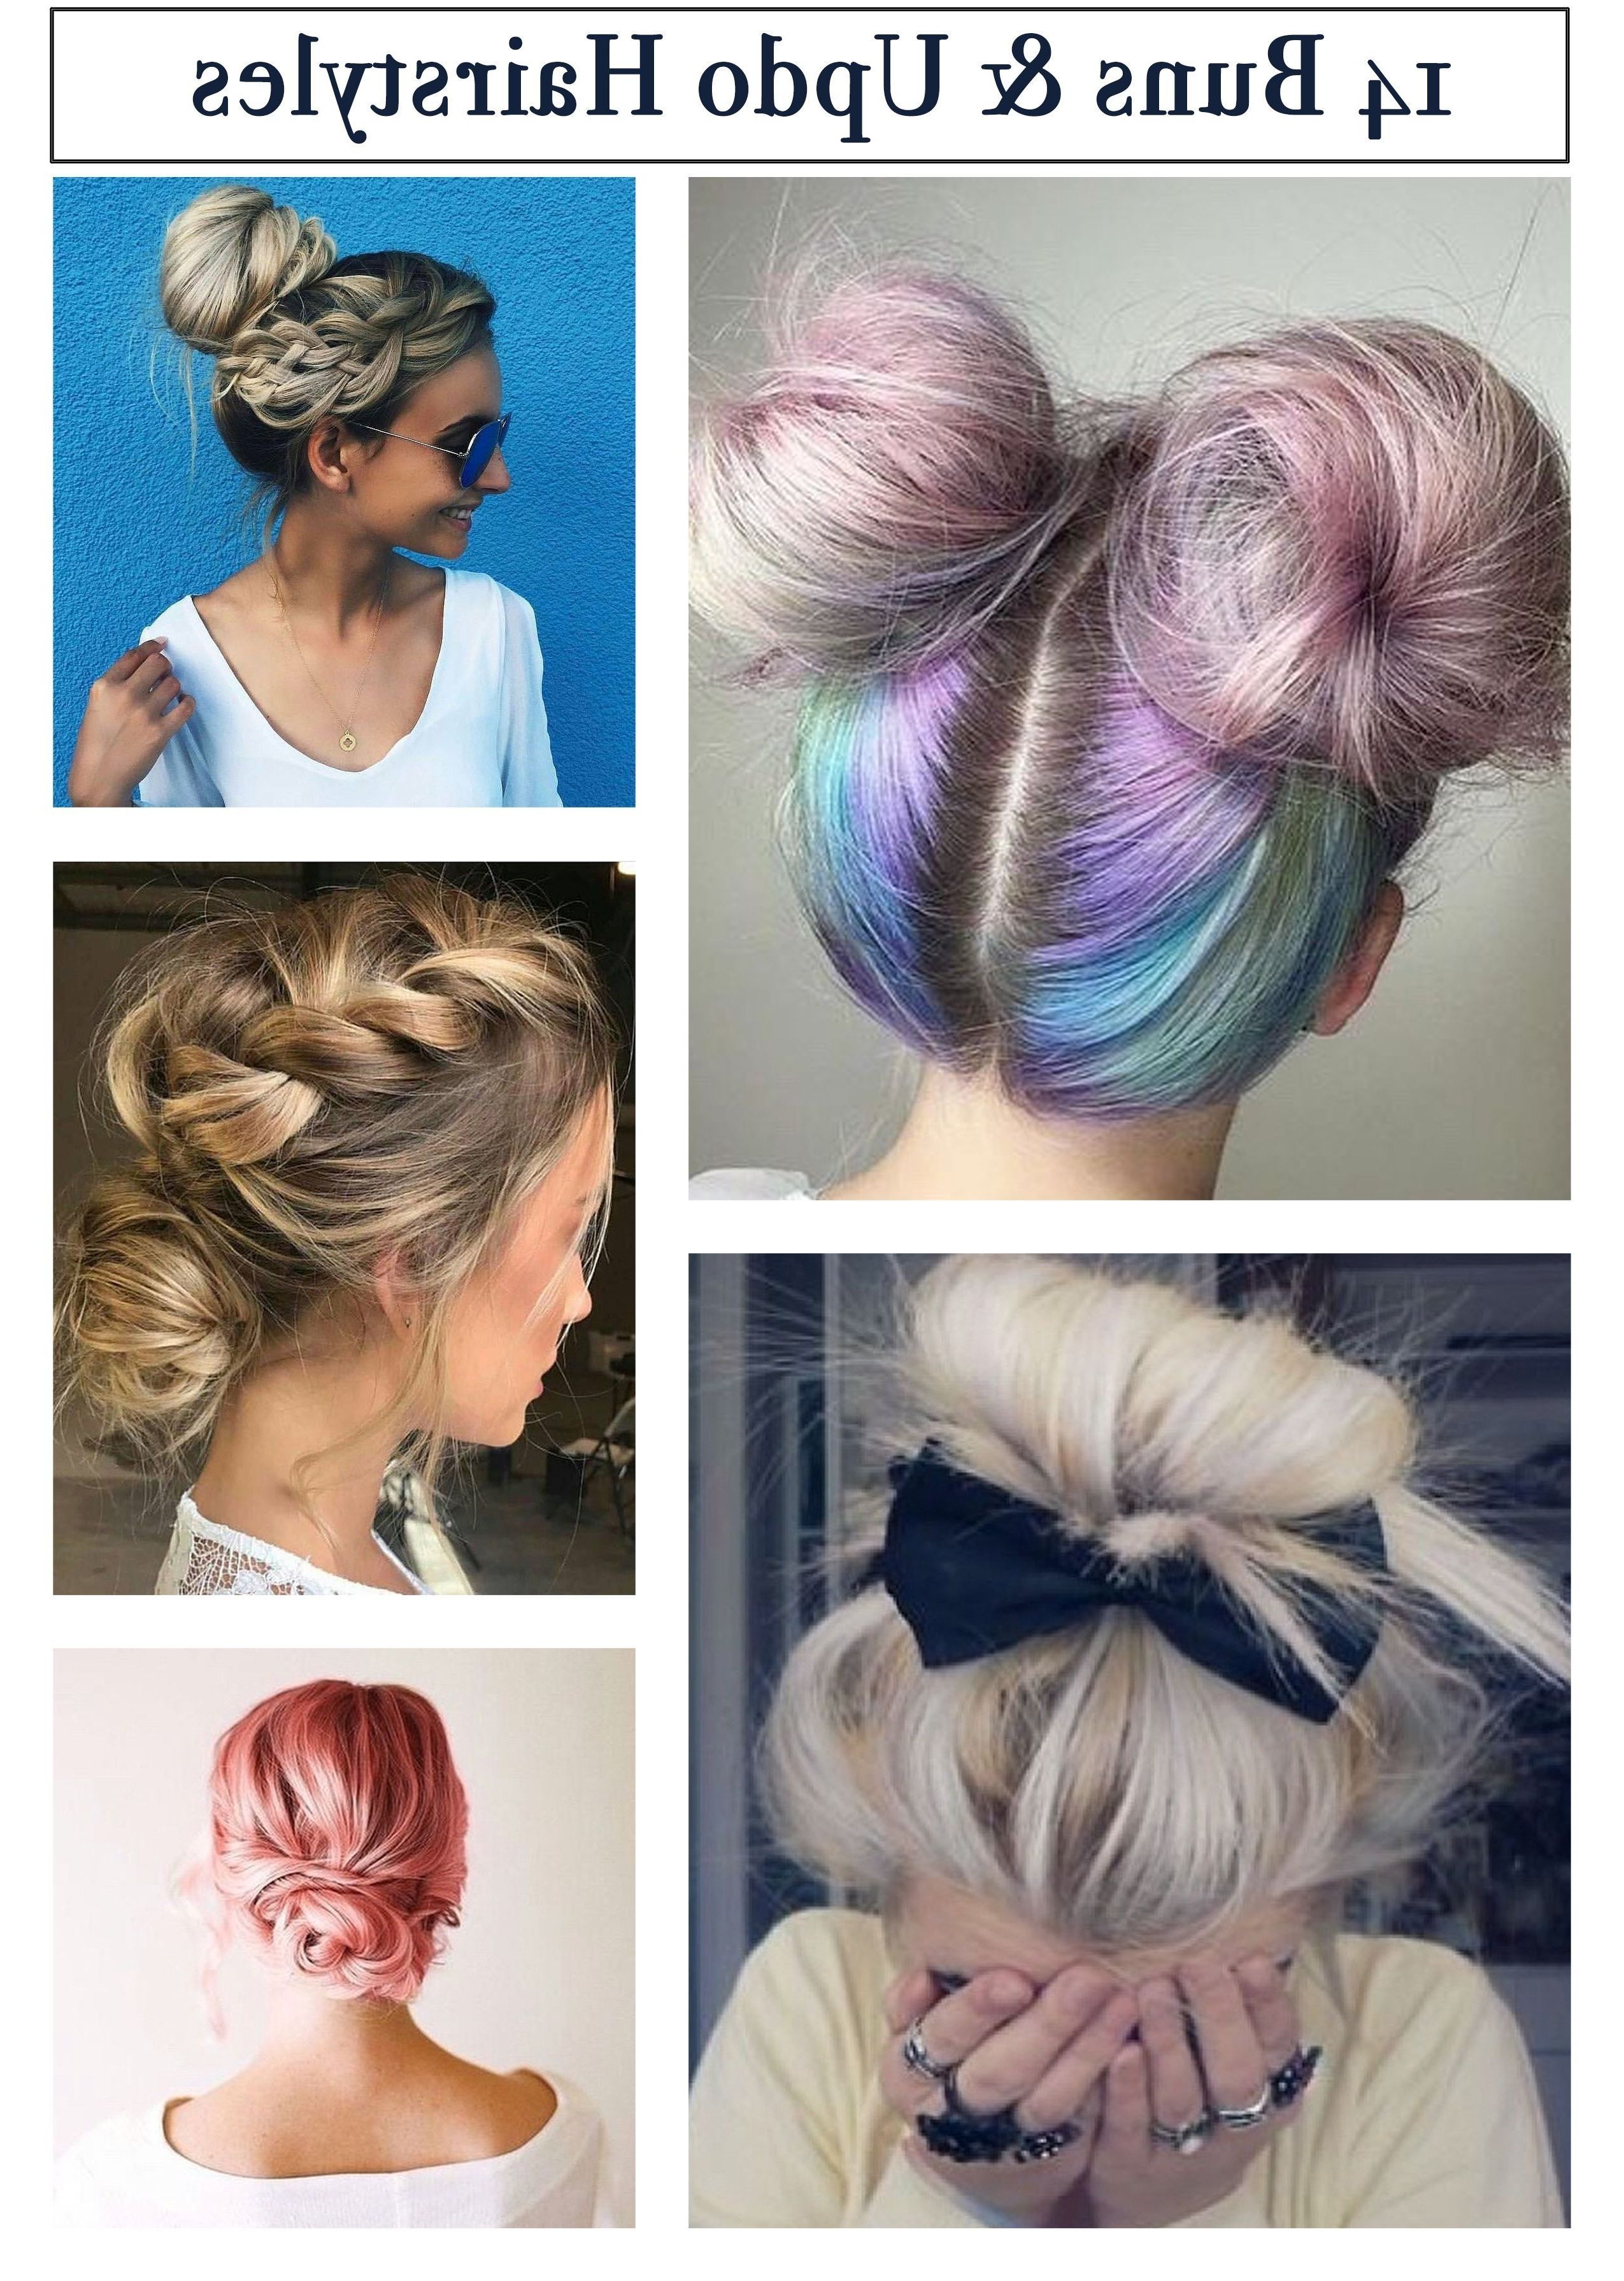 Updo Hairstyles To Try This Summer – 14 Different Hair Buns Throughout Famous Two French Braid Hairstyles With A Sock Bun (View 15 of 15)